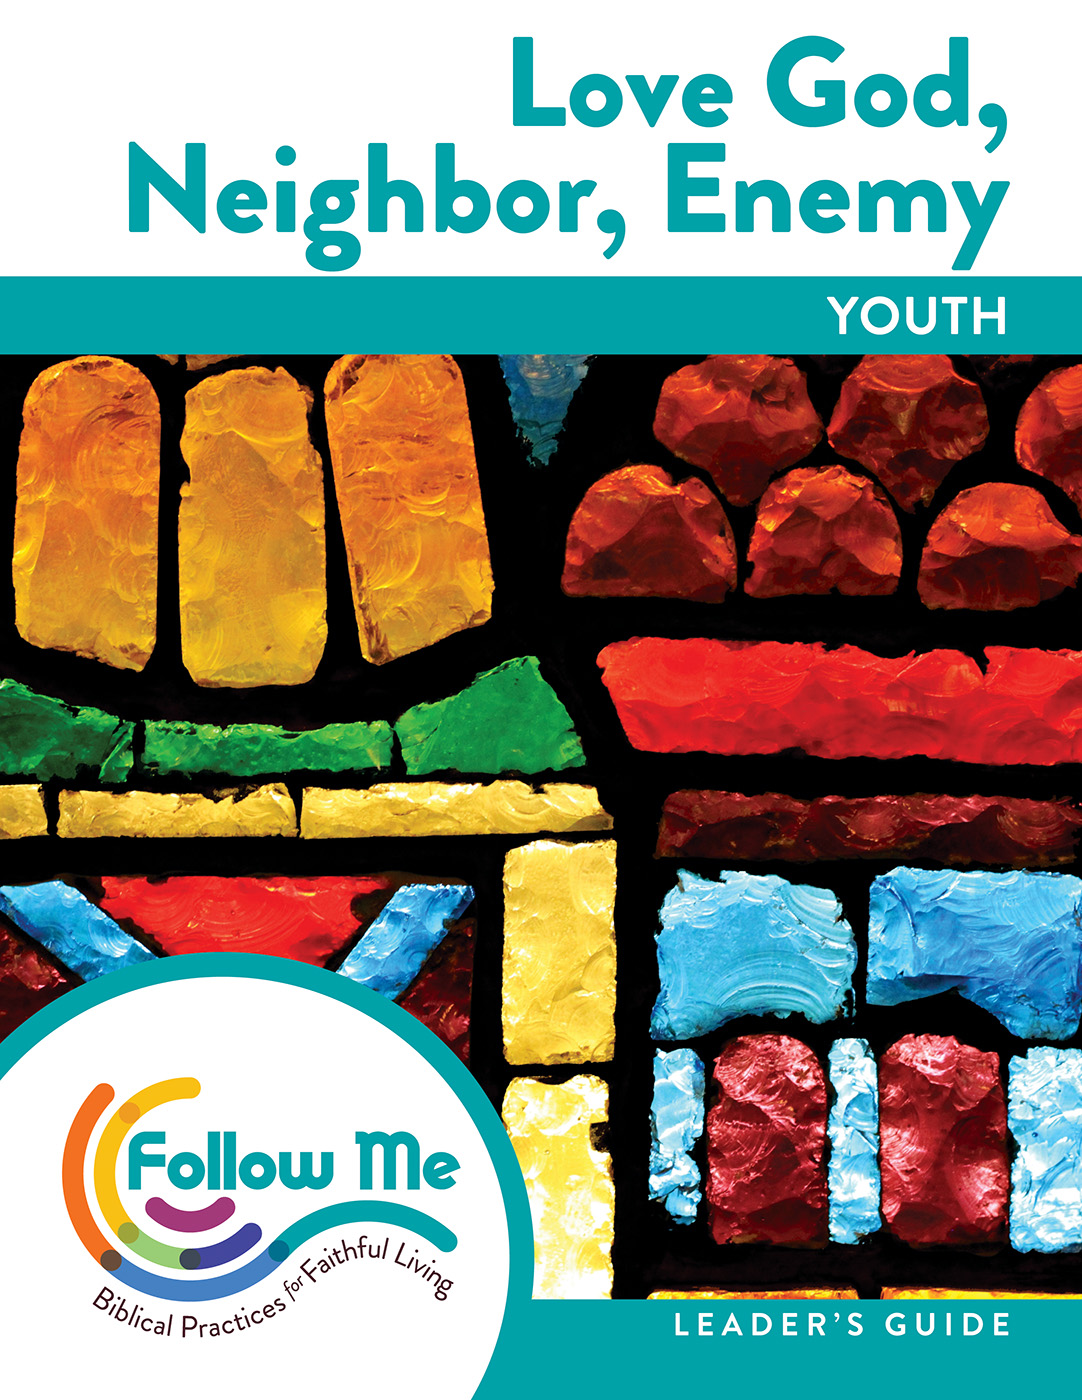 Love God, Neighbor, Enemy – Youth Leader's Guide, 6 Sessions: Downloadable